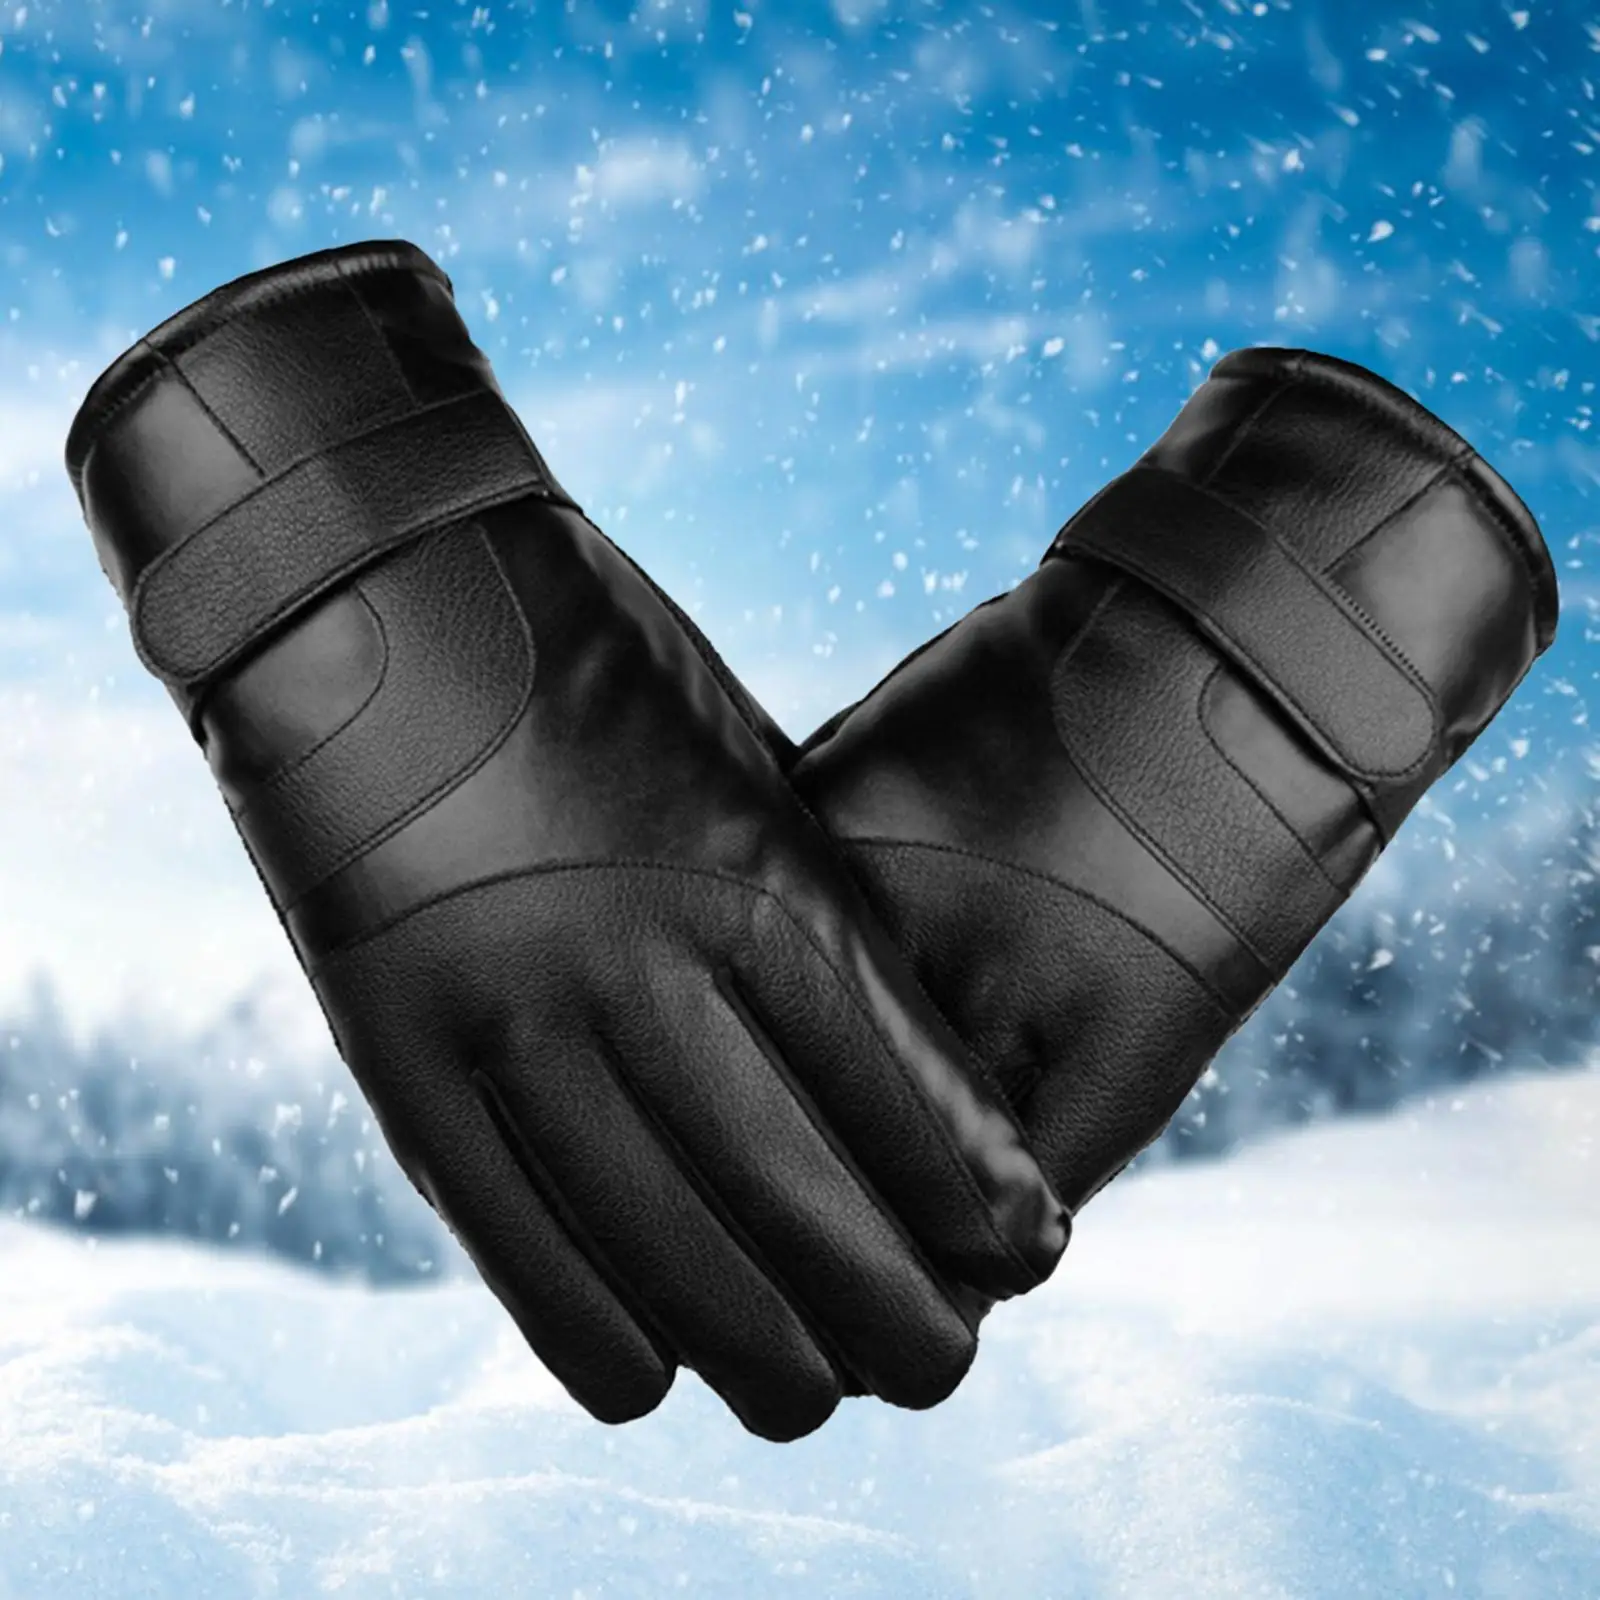 Unisex Winter Thermal Gloves Touchscreen Outdoor for Riding Driving Climbing